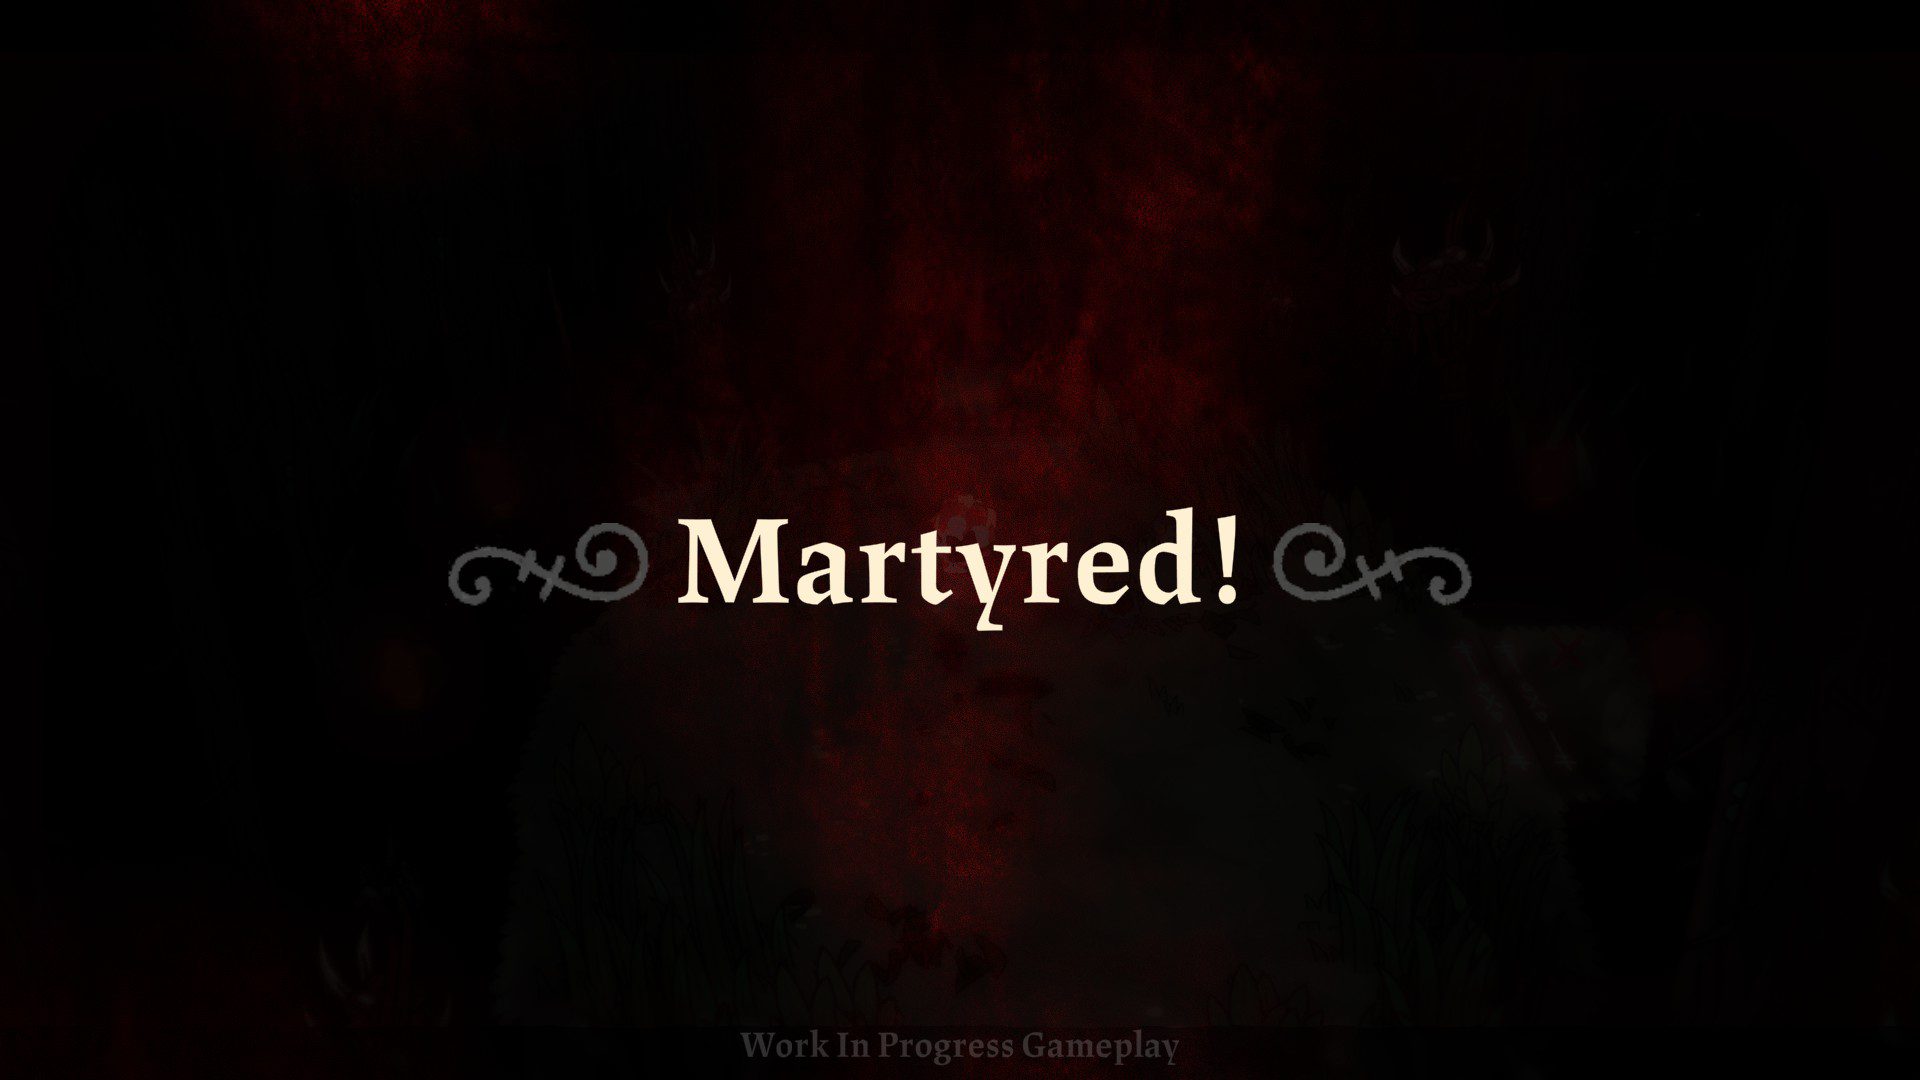 Game over screen from Cult of the Lamb demo, to display a gameplay element. The game over screen reads Martyred! with a red and black diffused colour background.